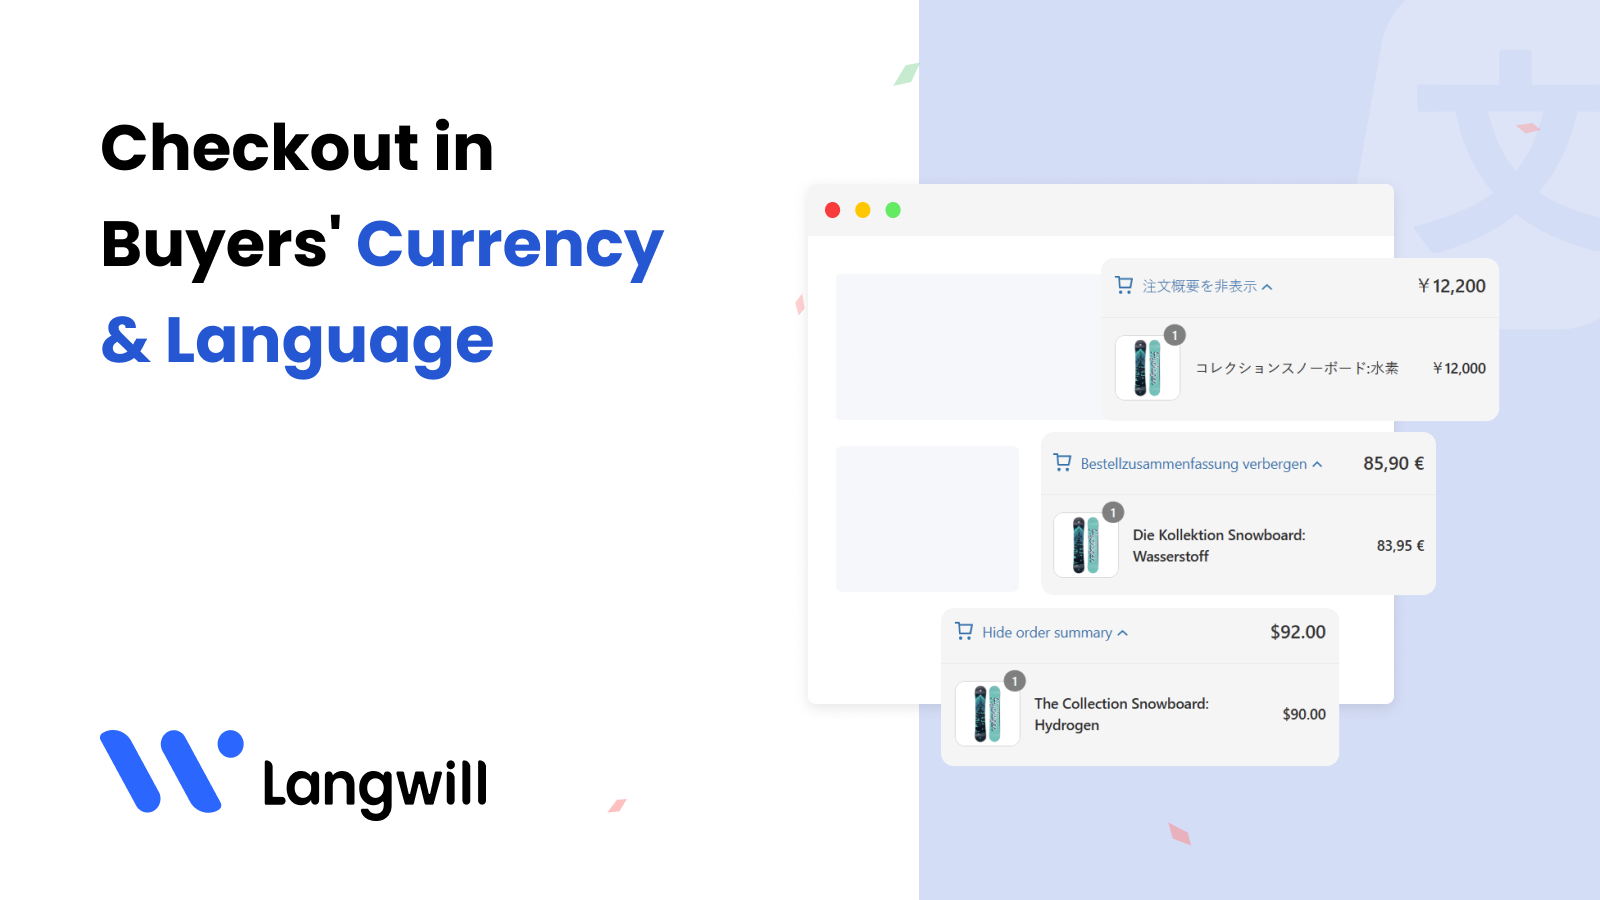 Convert currency & language in checkout page